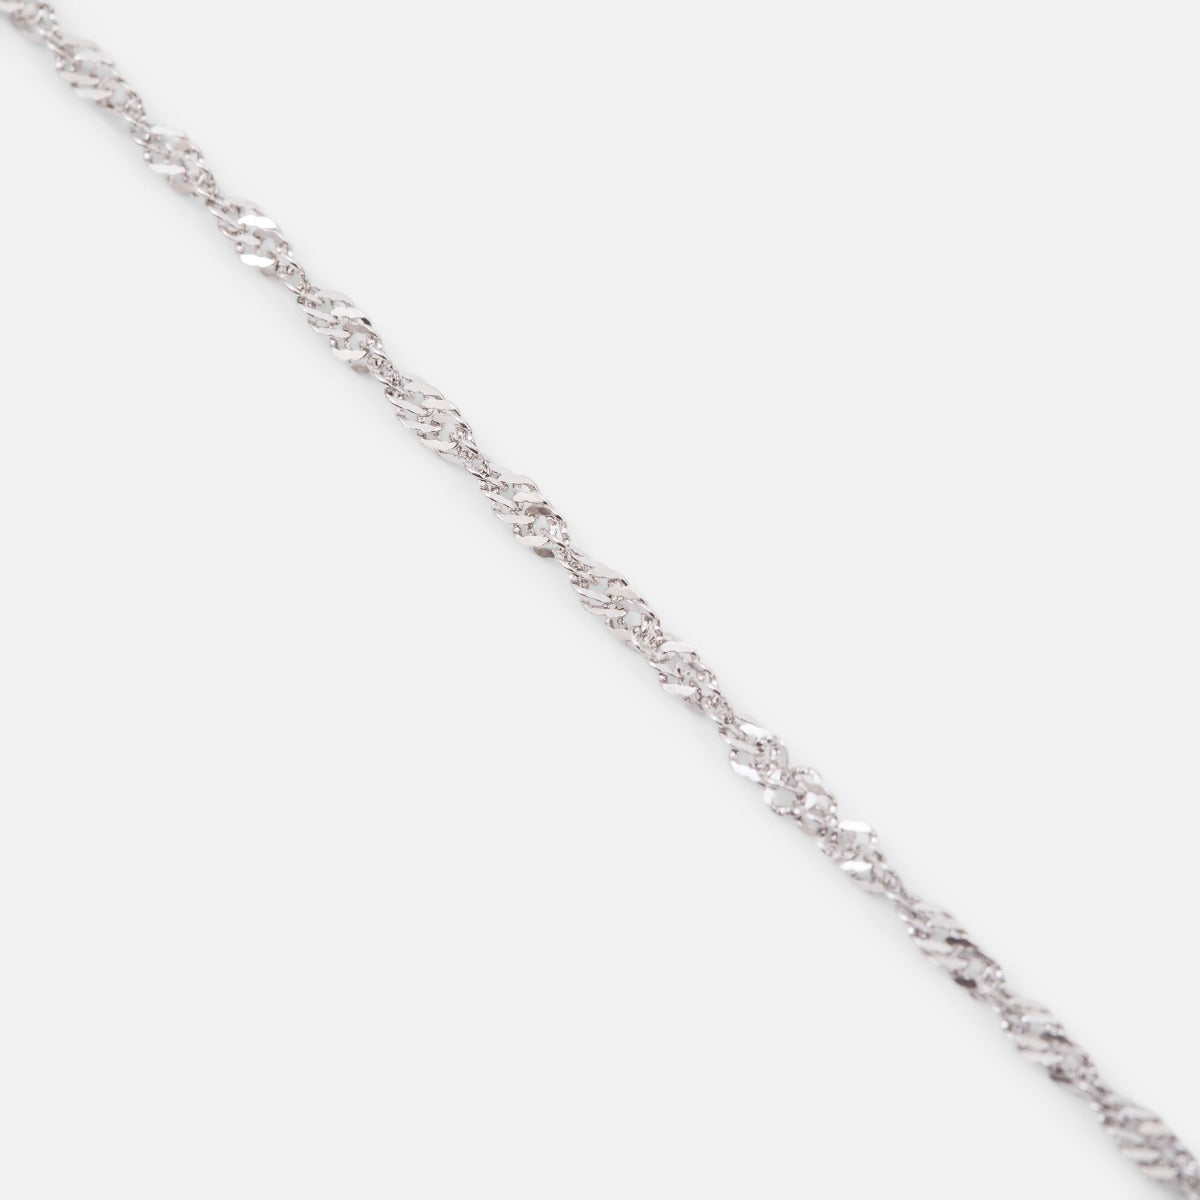 Sterling silver ankle chain with twisted links